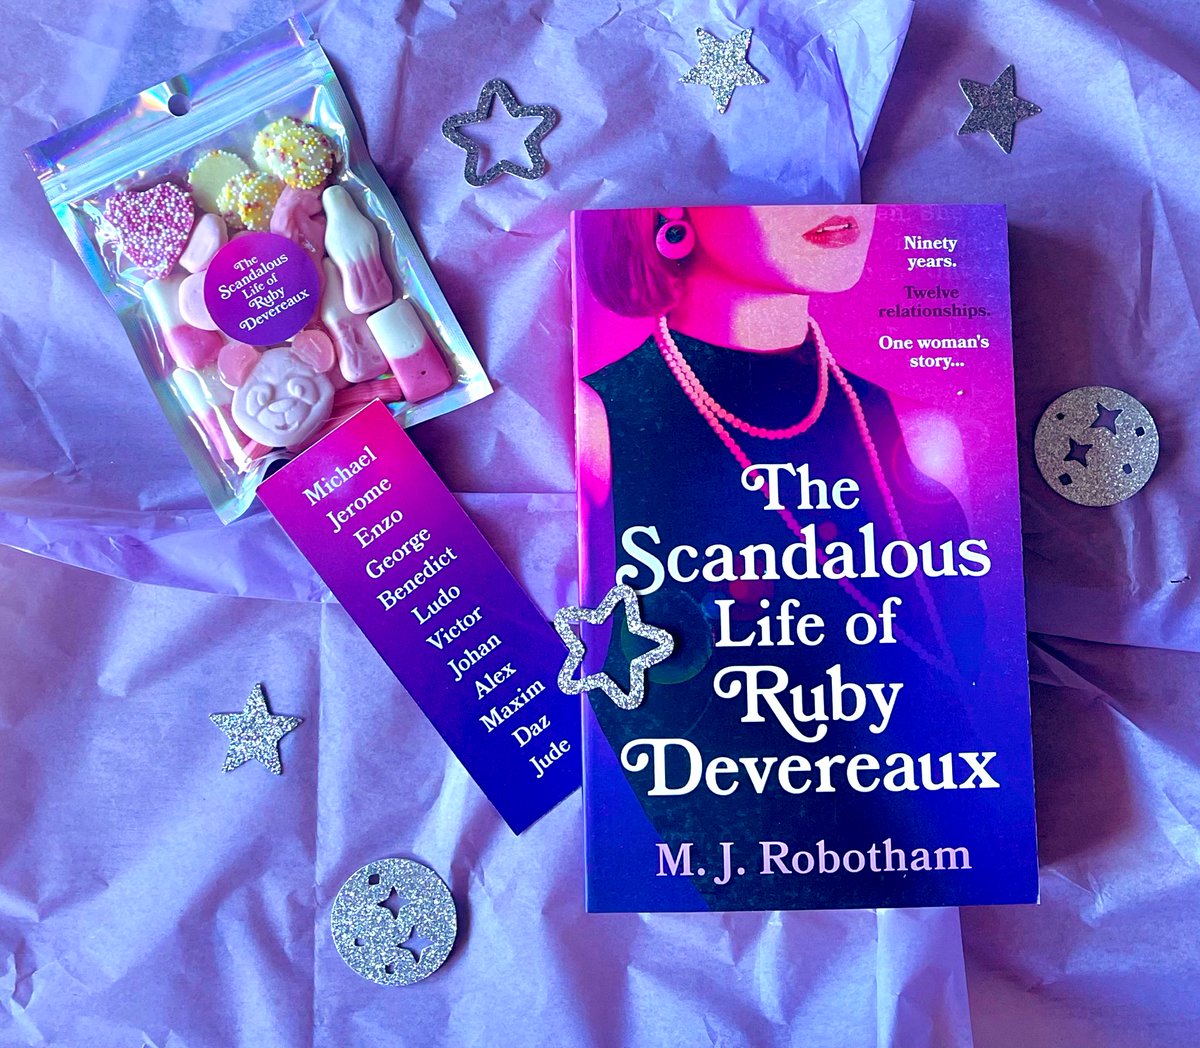 Thank you so much to @shannon_hewitt and @AriaFiction for this gorgeous package to celebrate the publication of #TheScandalousLifeofRubyDeveureaux which is out next week and looks fabulous! A book, a bookmark and a pack of sweets (which I have hidden!) what could be better?